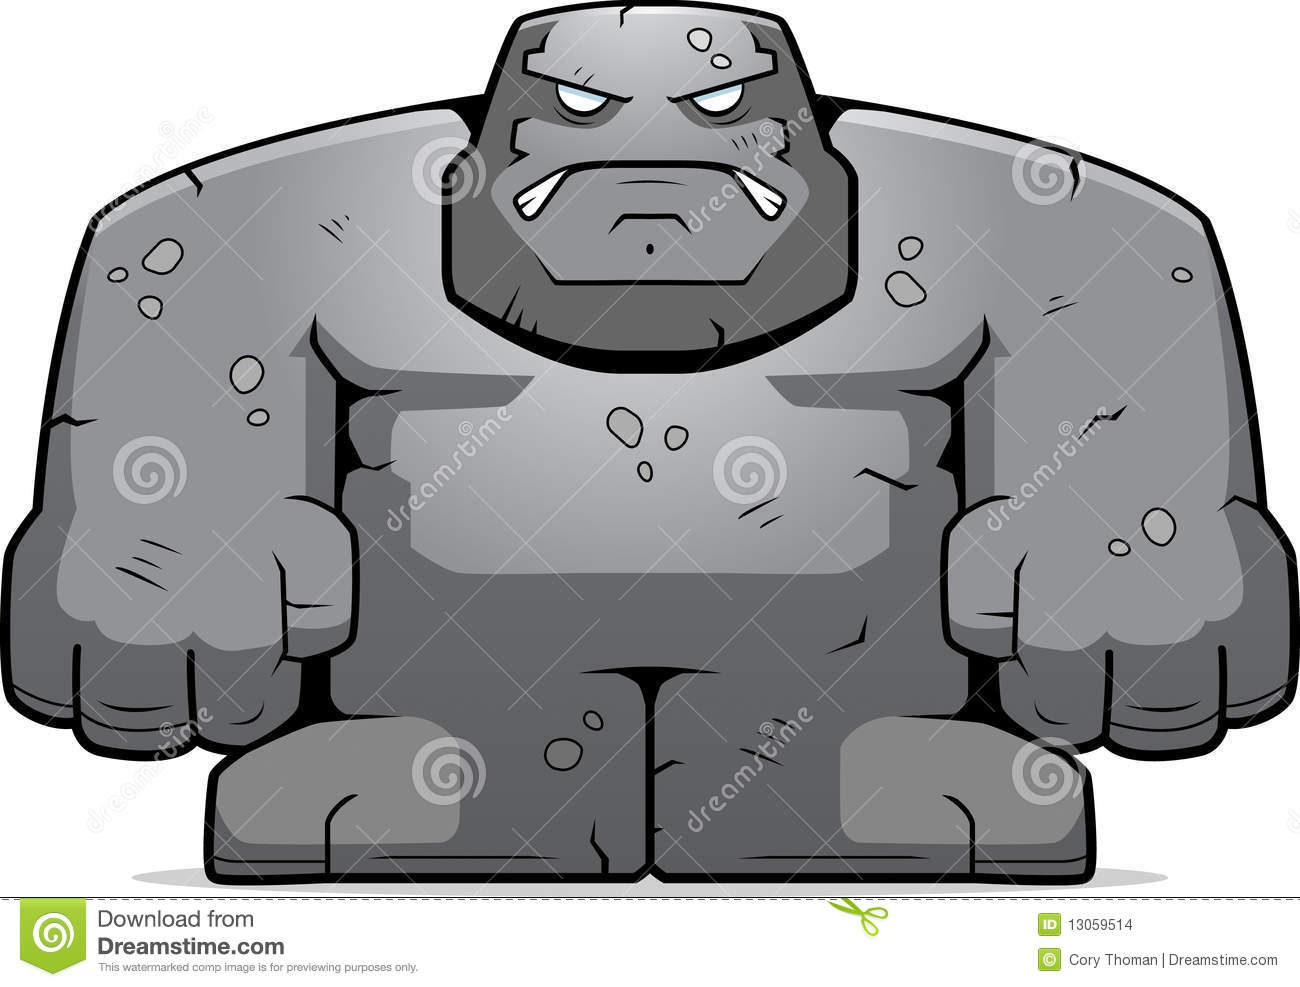 Golem clipart #17, Download drawings